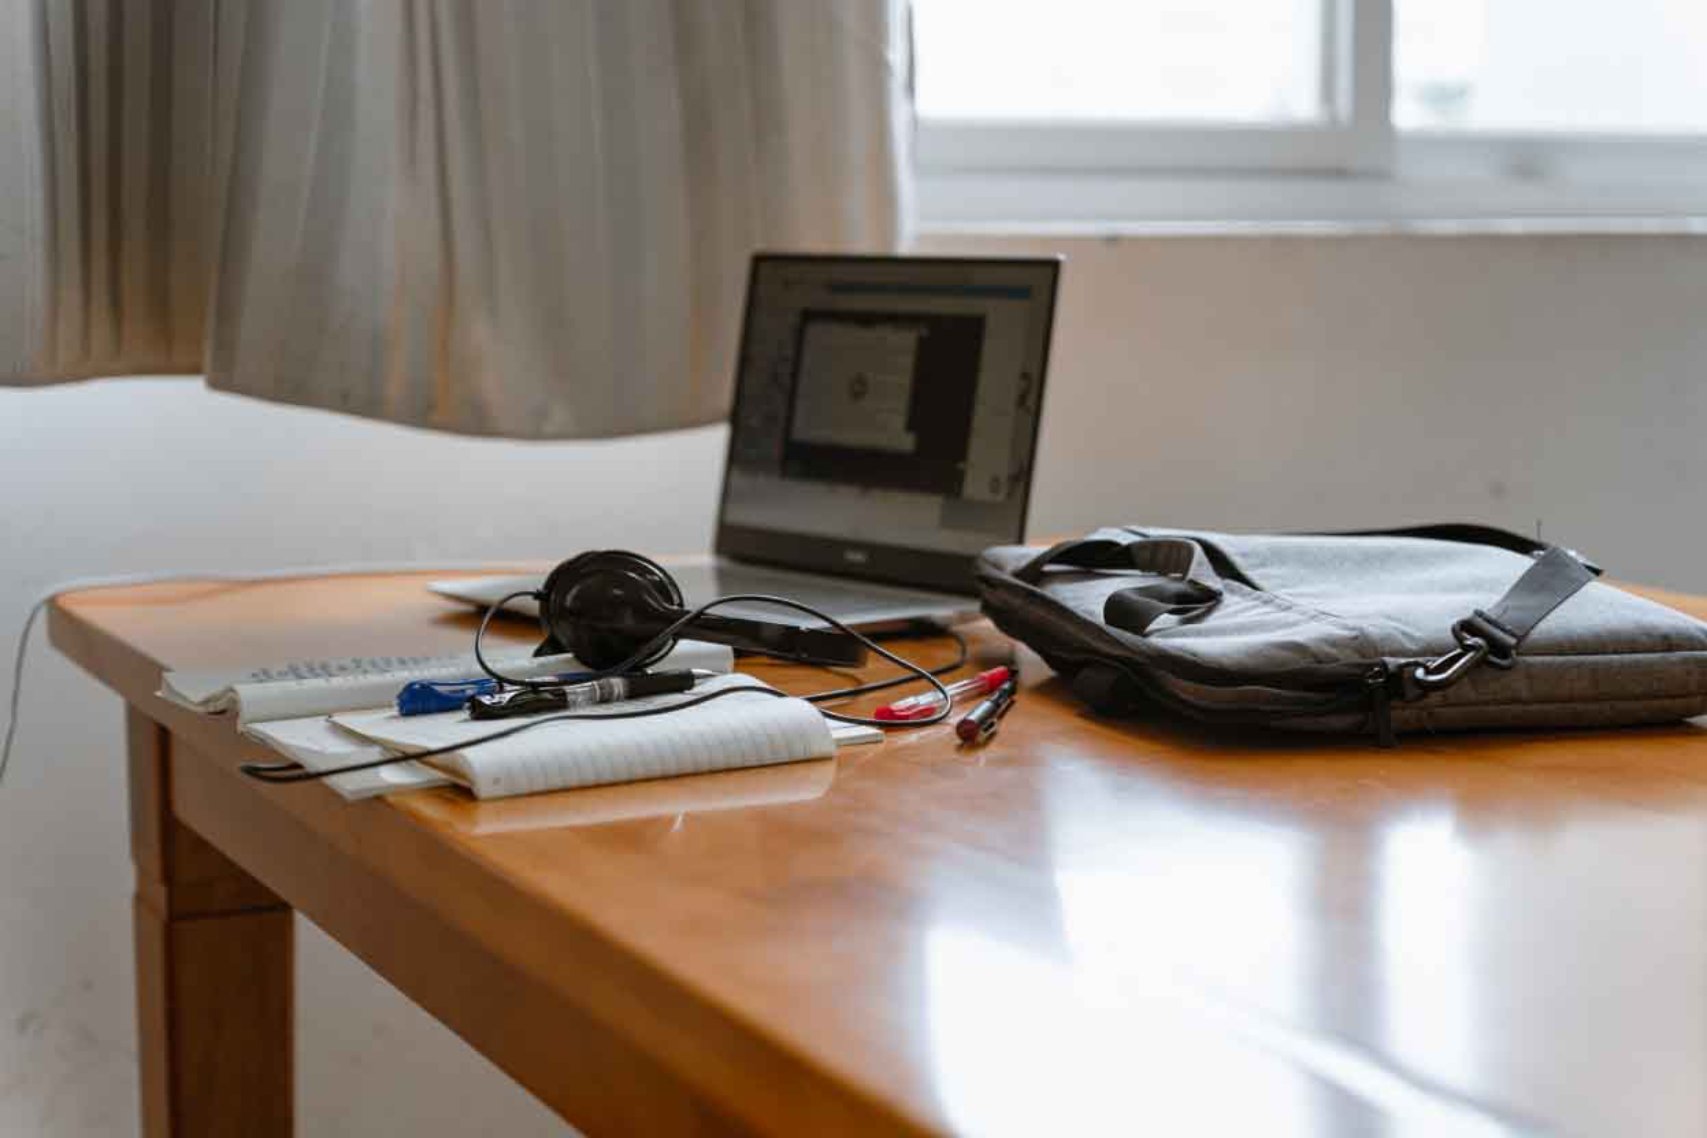 A laptop, bag, headset and other office supplies on top of a wooden table